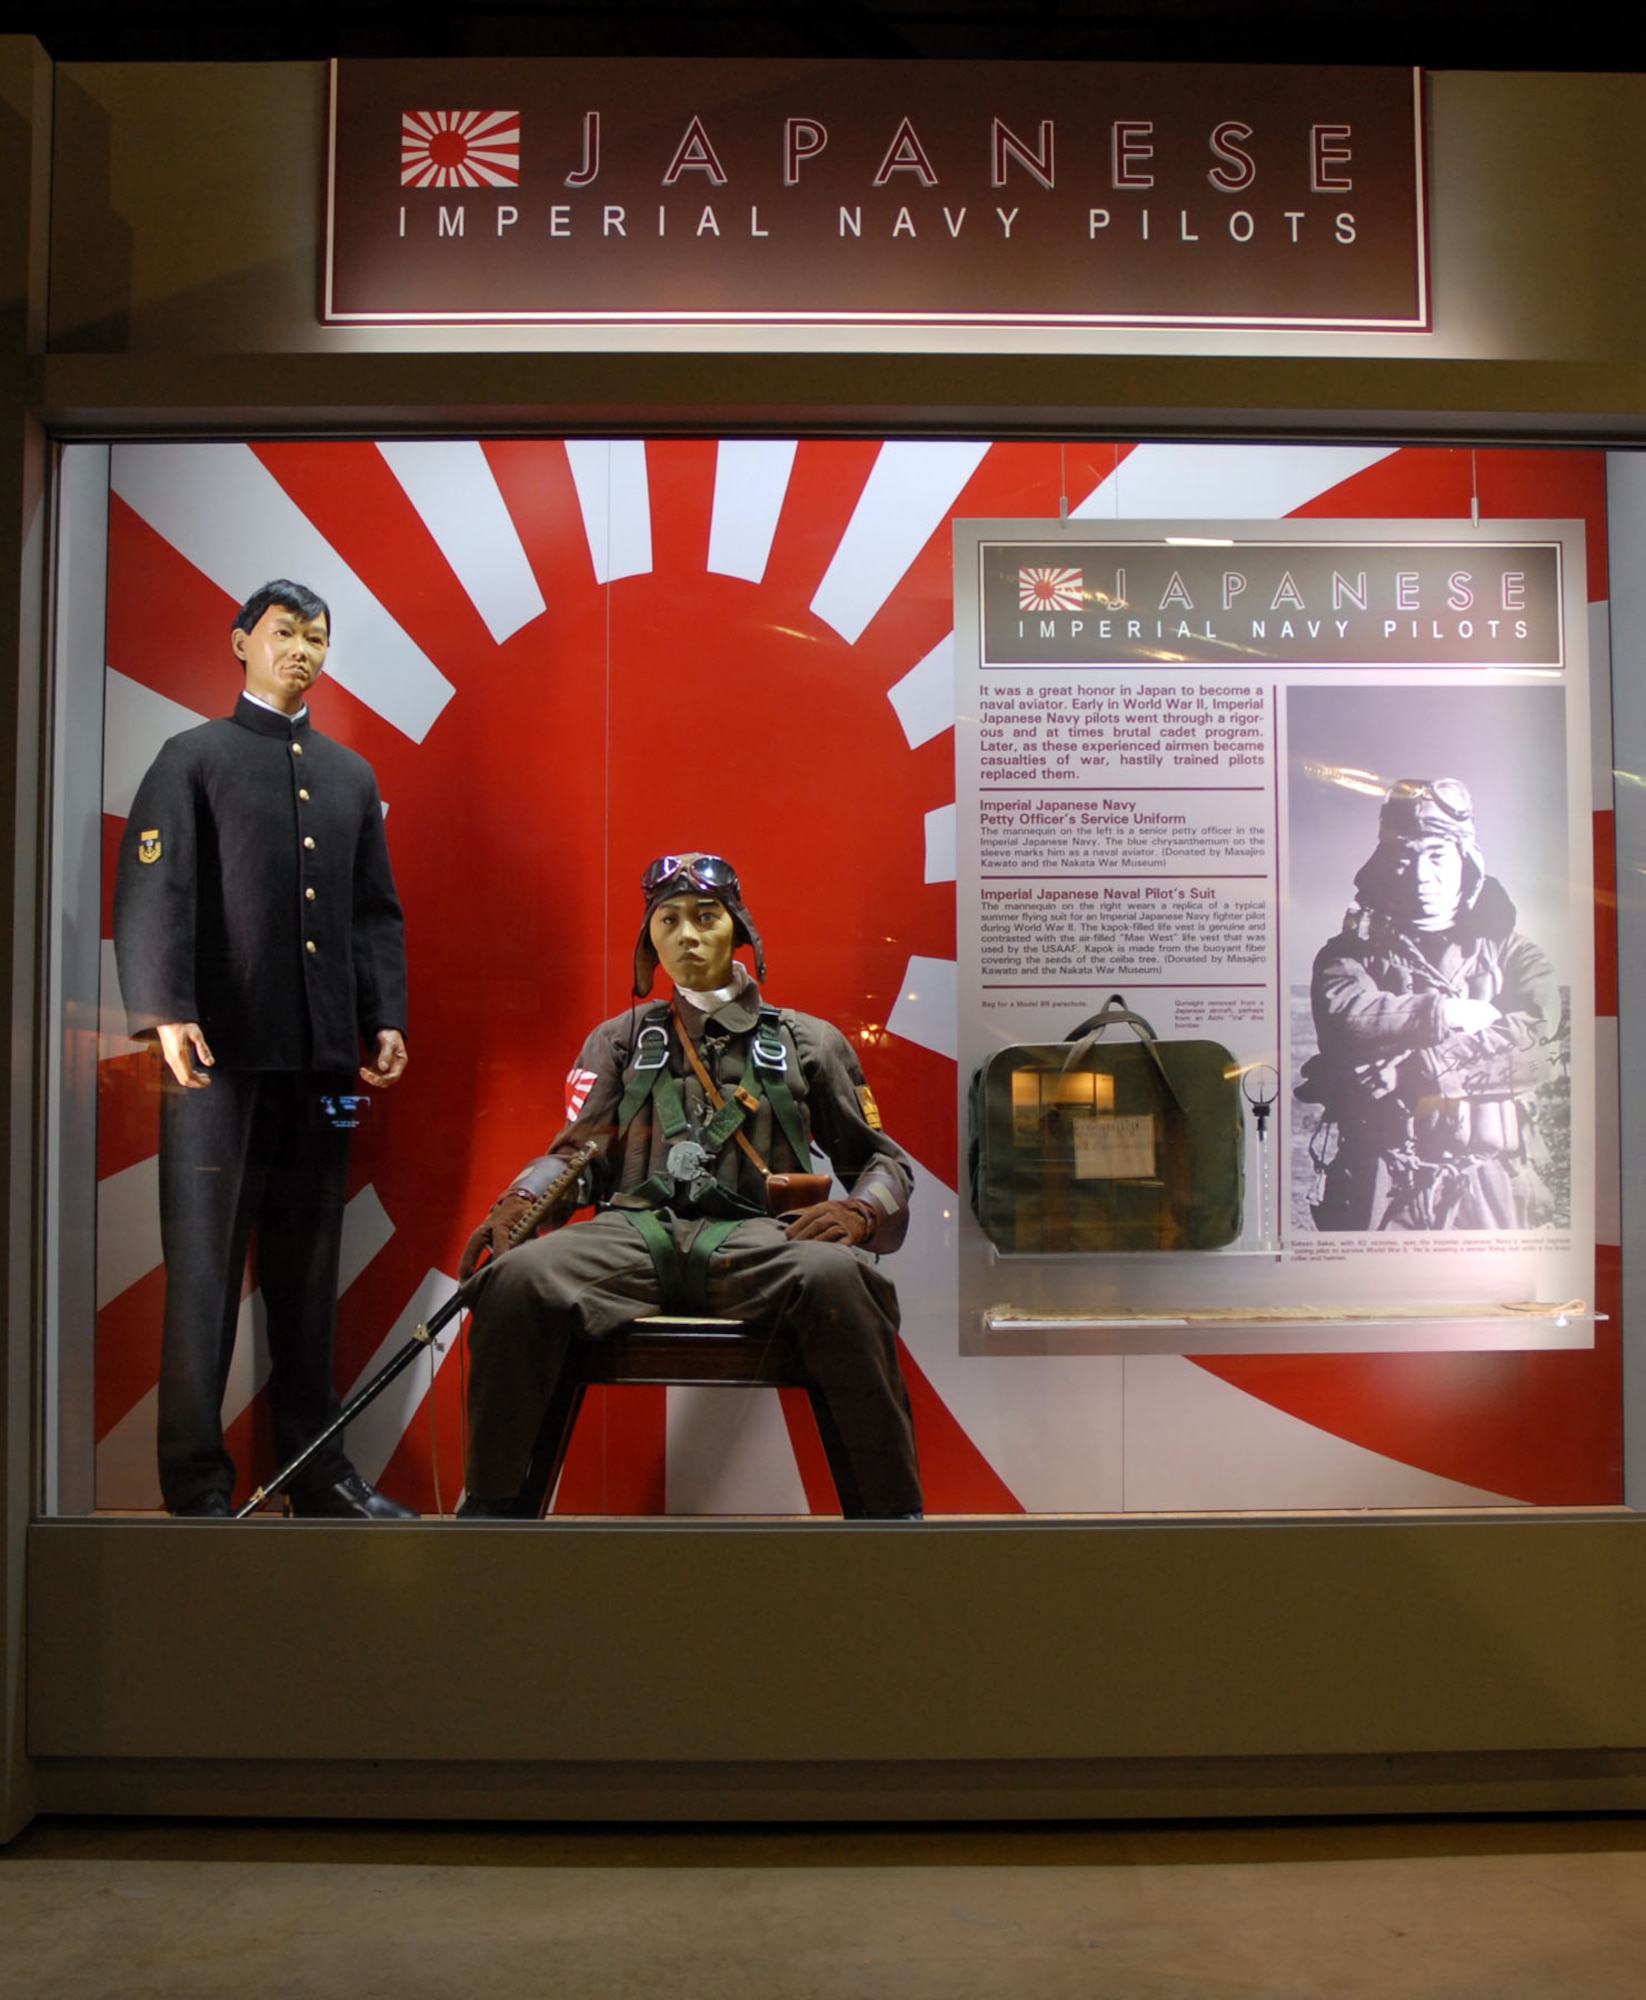 DAYTON, Ohio - The Japanese Imperial Navy Pilots portion of the WWII: Airmen in a World at War exhibit in the World War II Gallery at the National Museum of the U.S. Air Force. (U.S. Air Force photo)